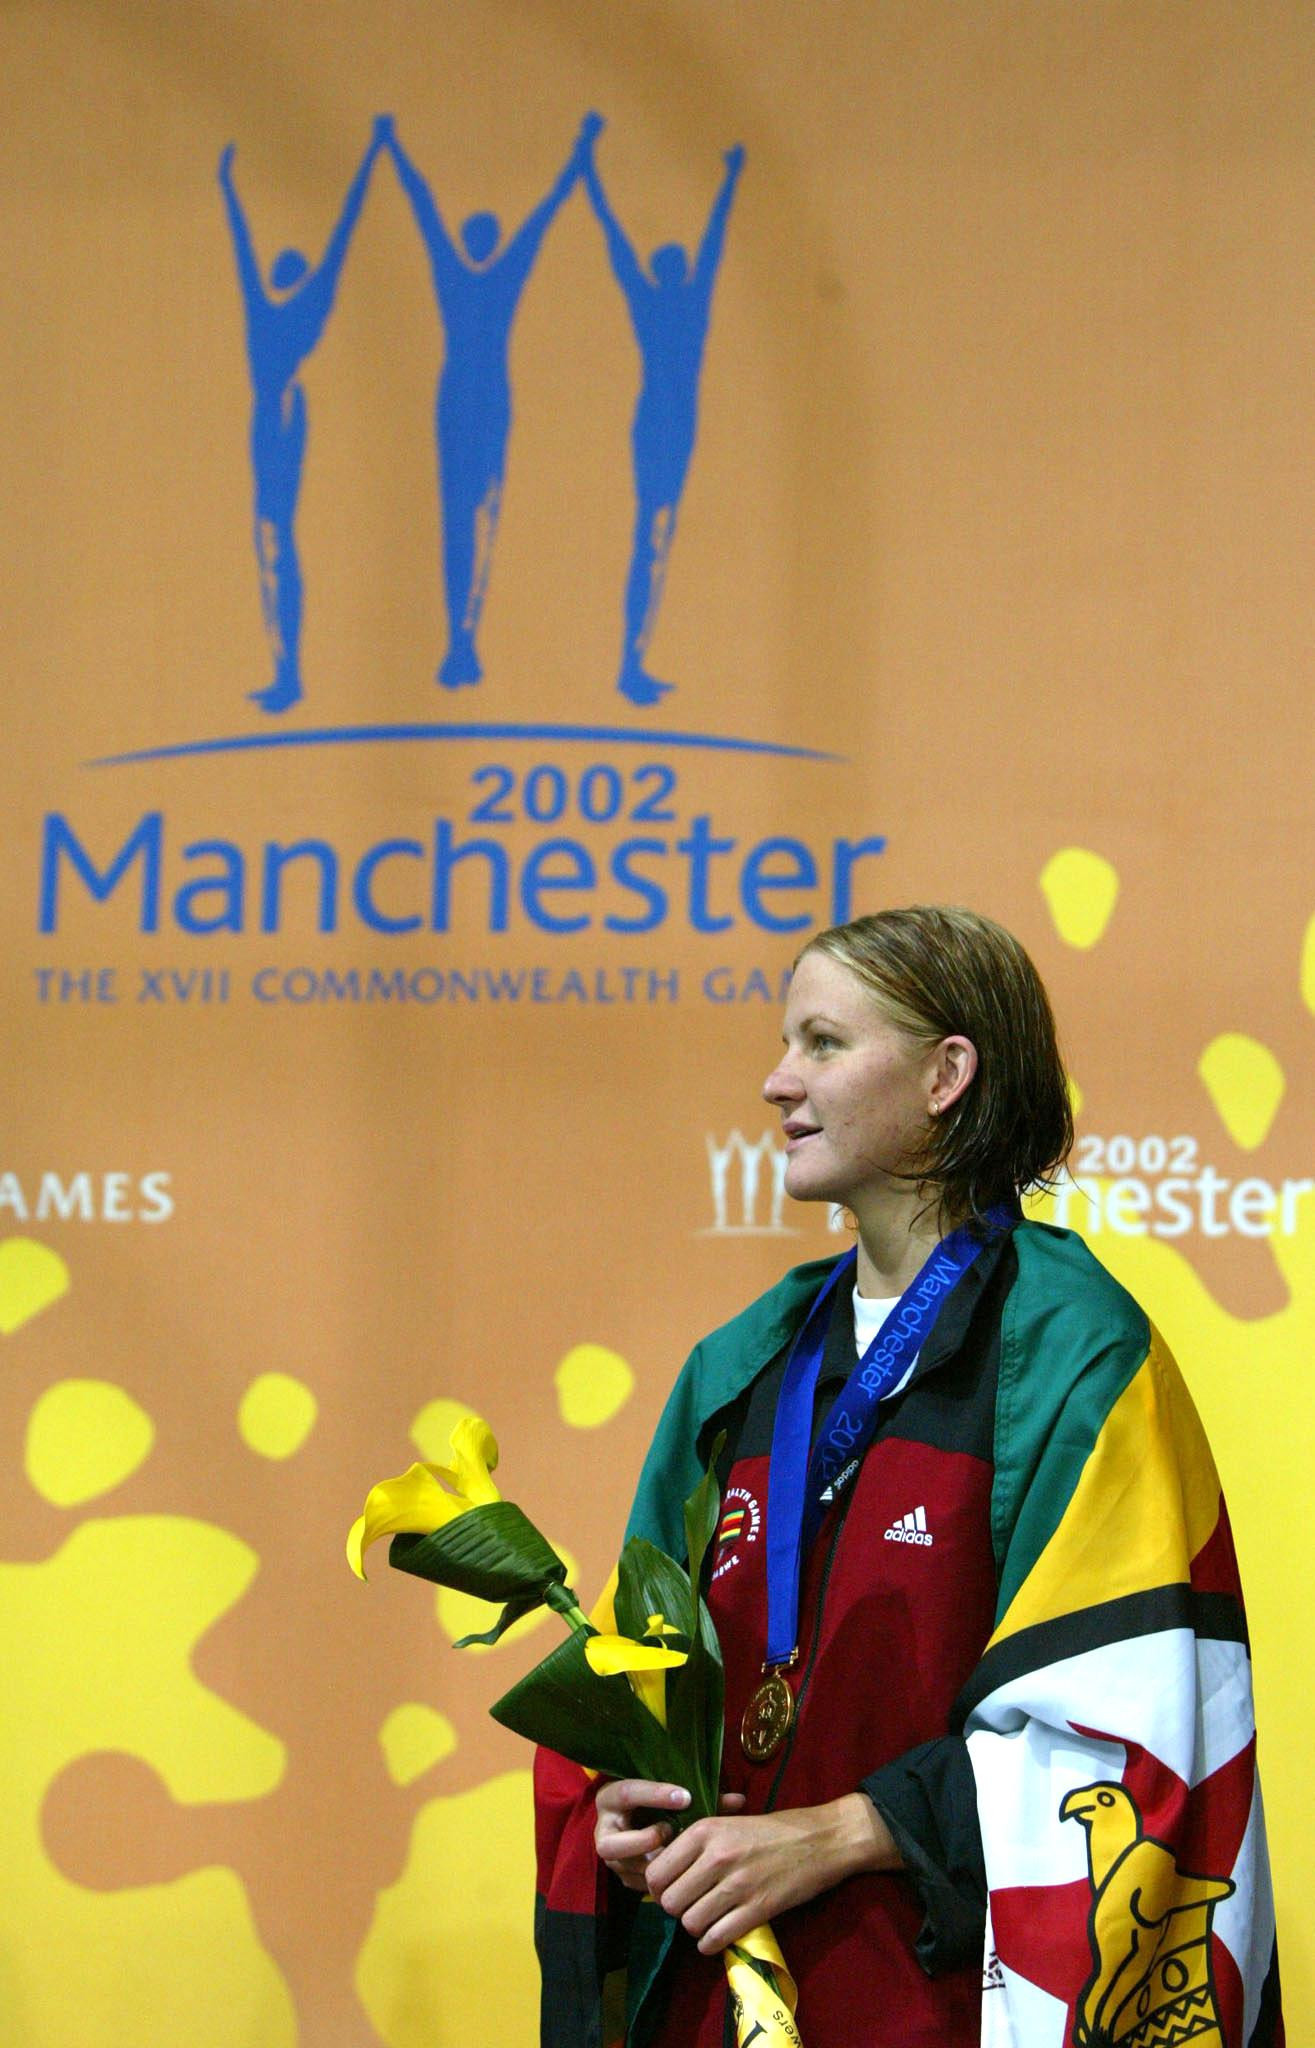 Zimbabwe's Kirsty Coventry celebrates winning a 200m individual medley gold medal at the Manchester 2002 Commonwealth Games - the last time her country competed in the event ©Getty Images